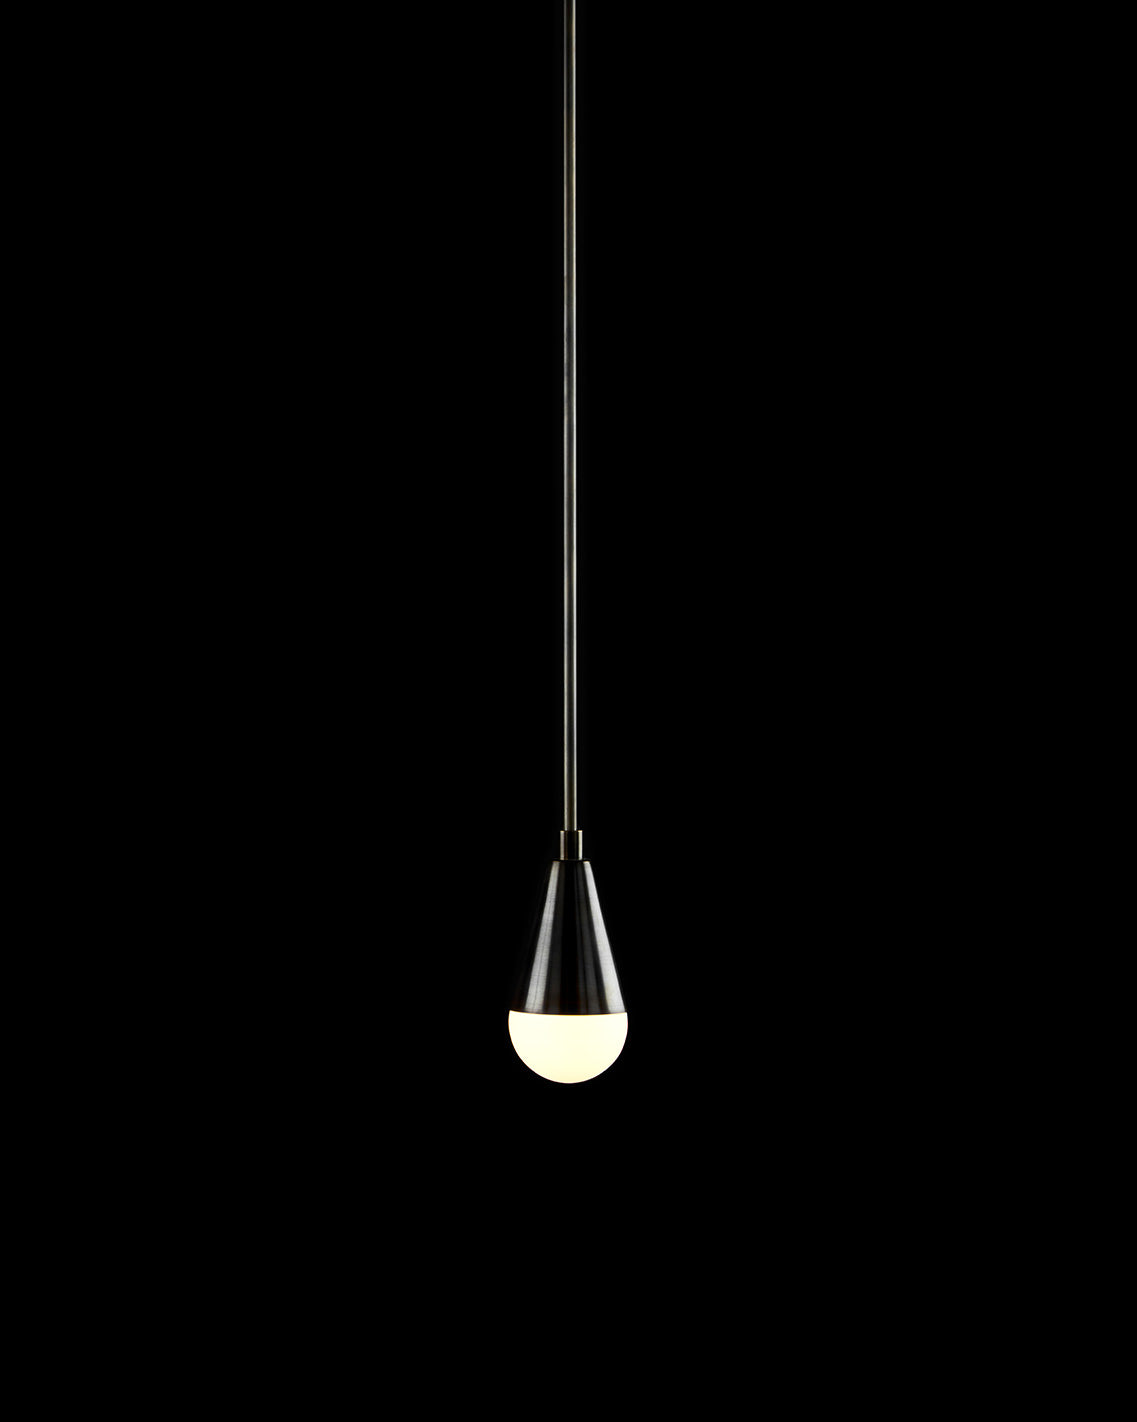 TRIAD : 1 ceiling pendant in Blackened Brass finish, against a black background. 